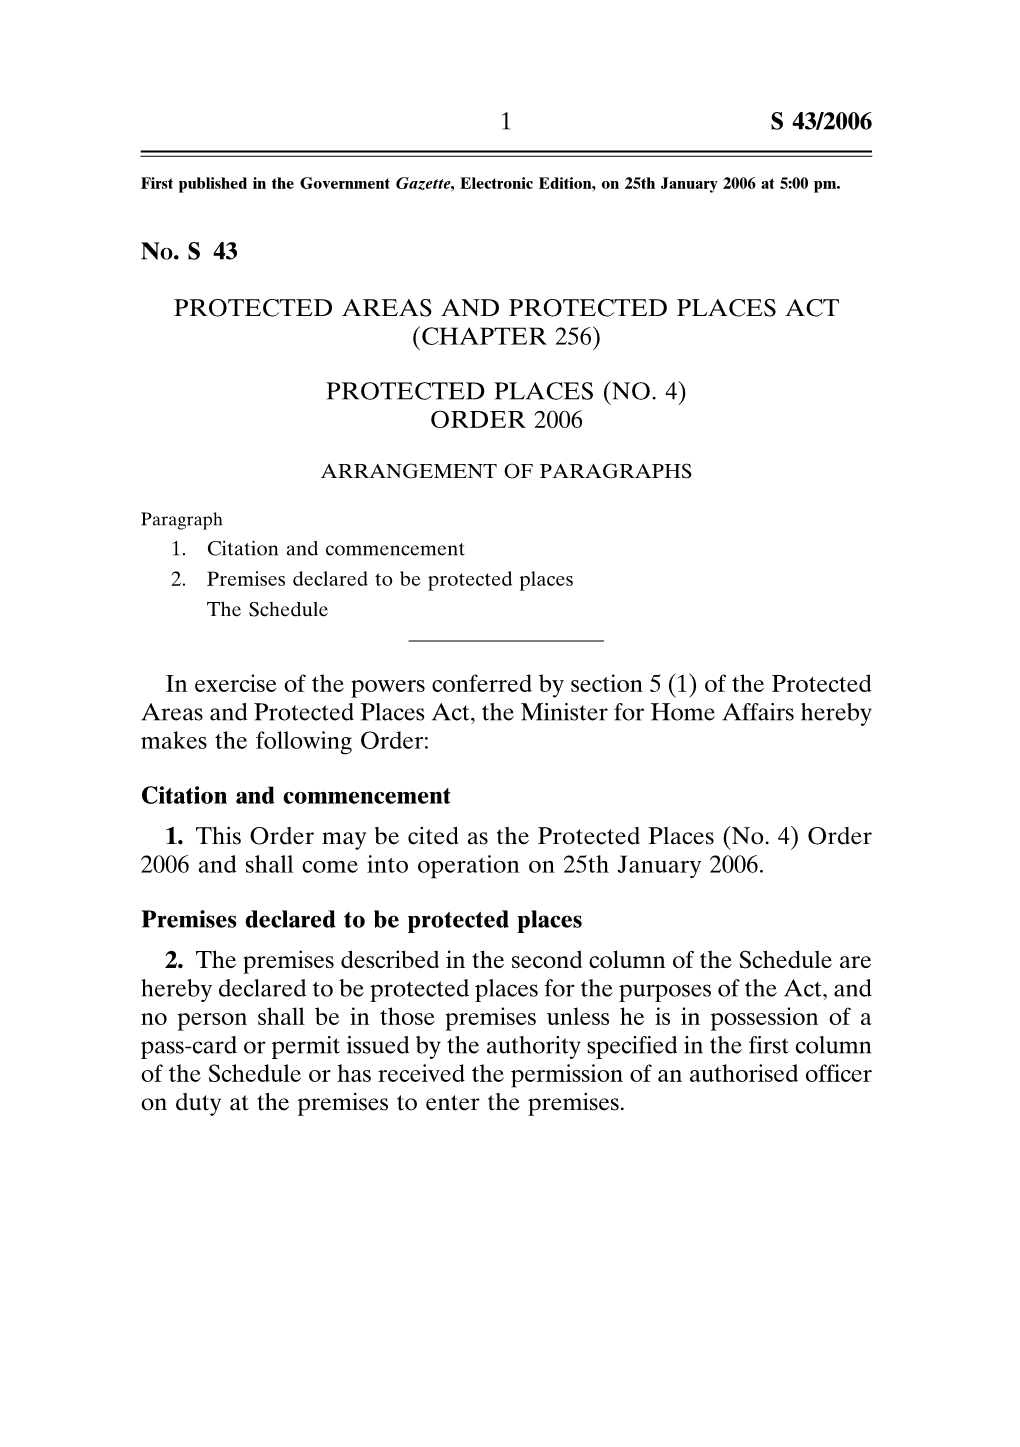 NO. S 43 PROTECTED AREAS and PROTECTED PLACES ACT (CHAPTER 256) PROTECTED PLACES (NO. 4) ORDER 2006 in Exercise of the Powers Co